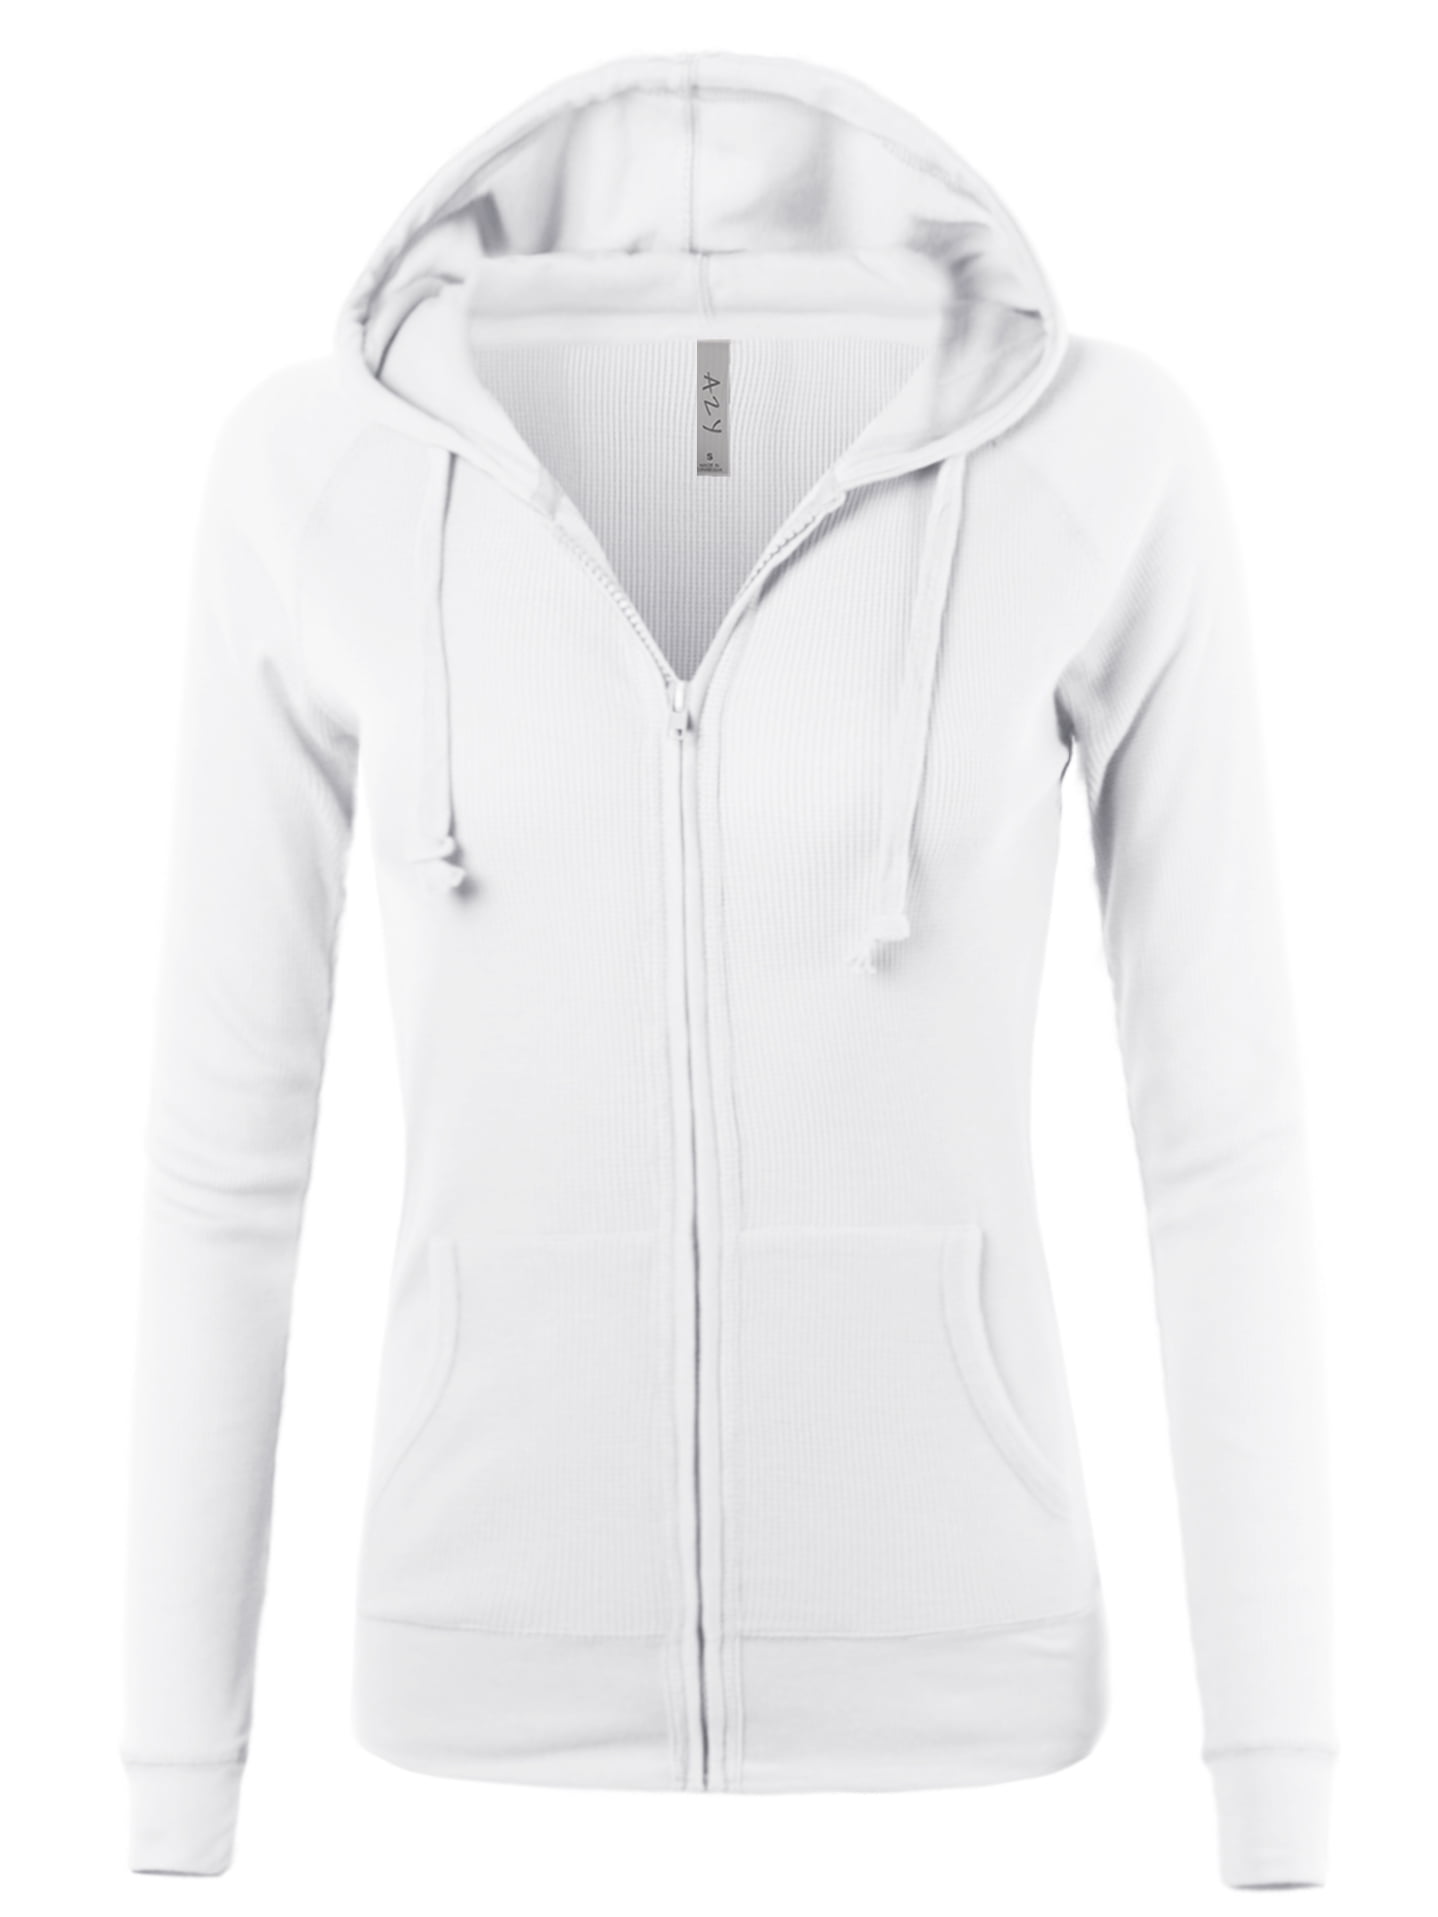 A2Y Women's Casual Fitted Lightweight Pocket Zip Up Hoodie White S ...